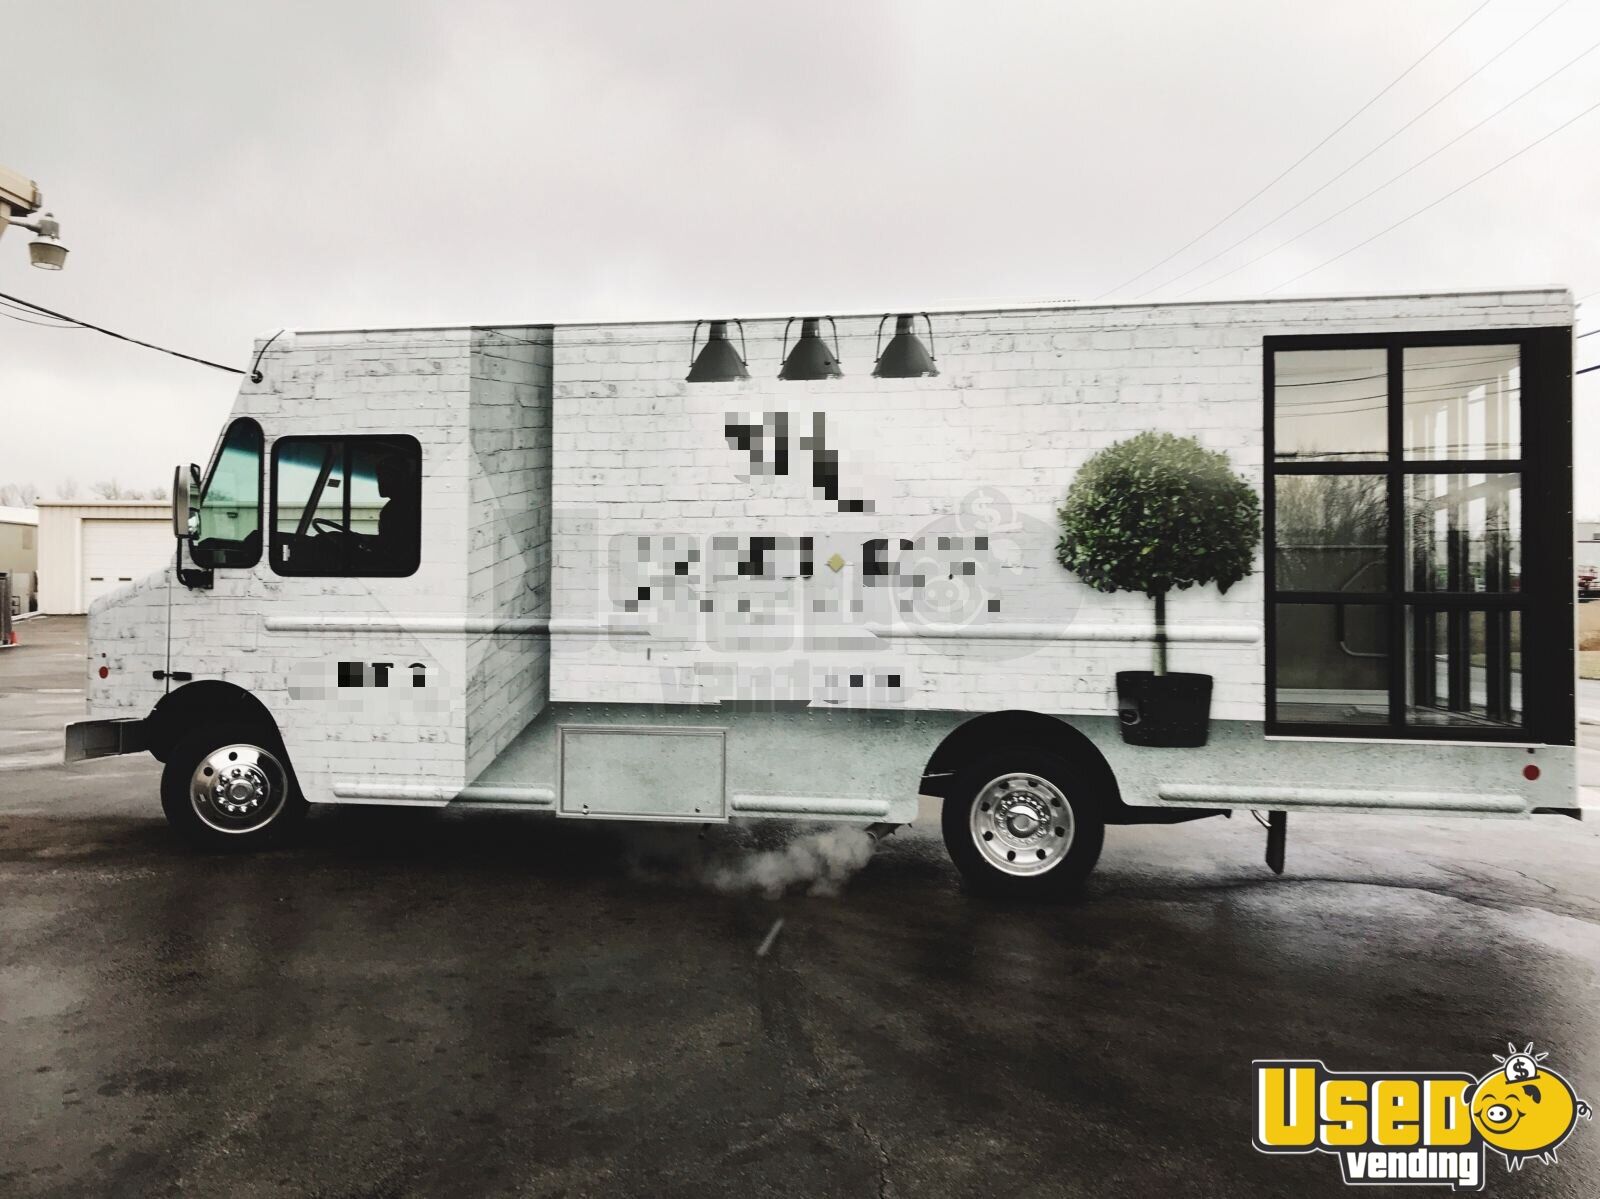 2016 28' Ford F59 Super Duty Step Van Mobile Boutique | Used Fashion Truck  with Porch for Sale in Ohio